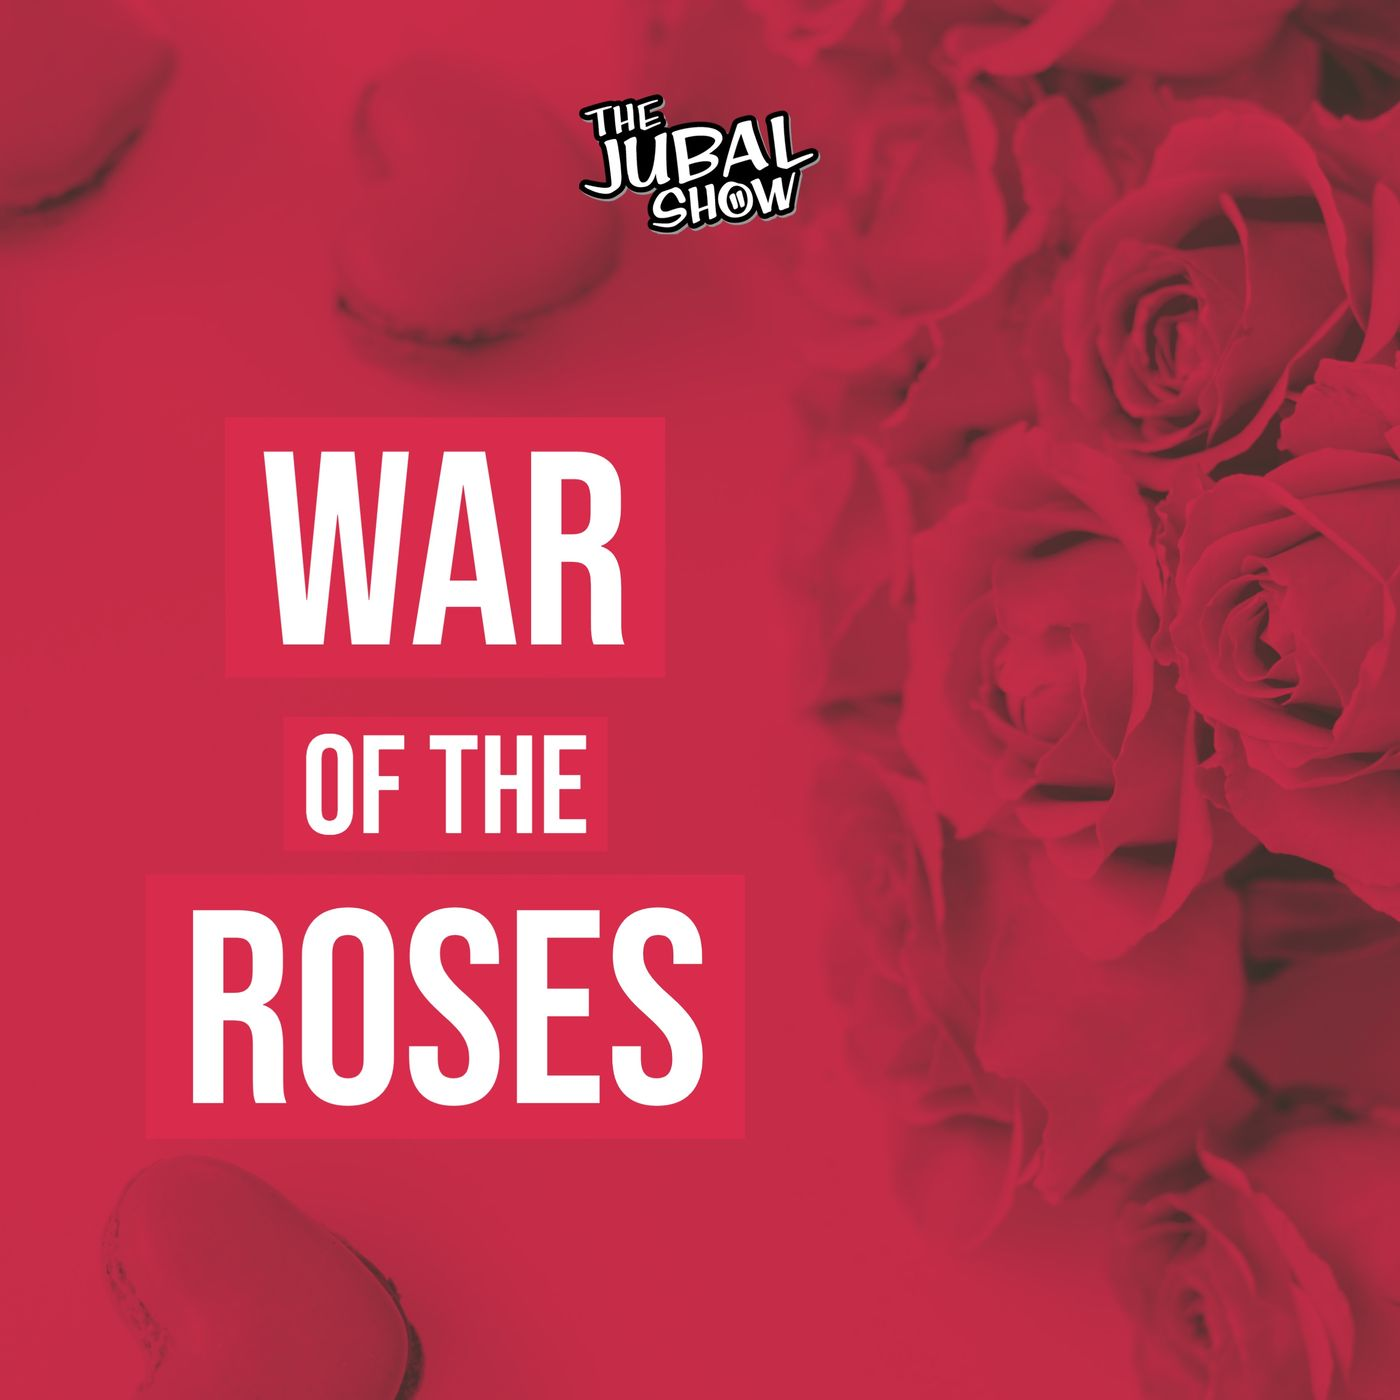 The Jubal Show goes to therapy in this War of the Roses!